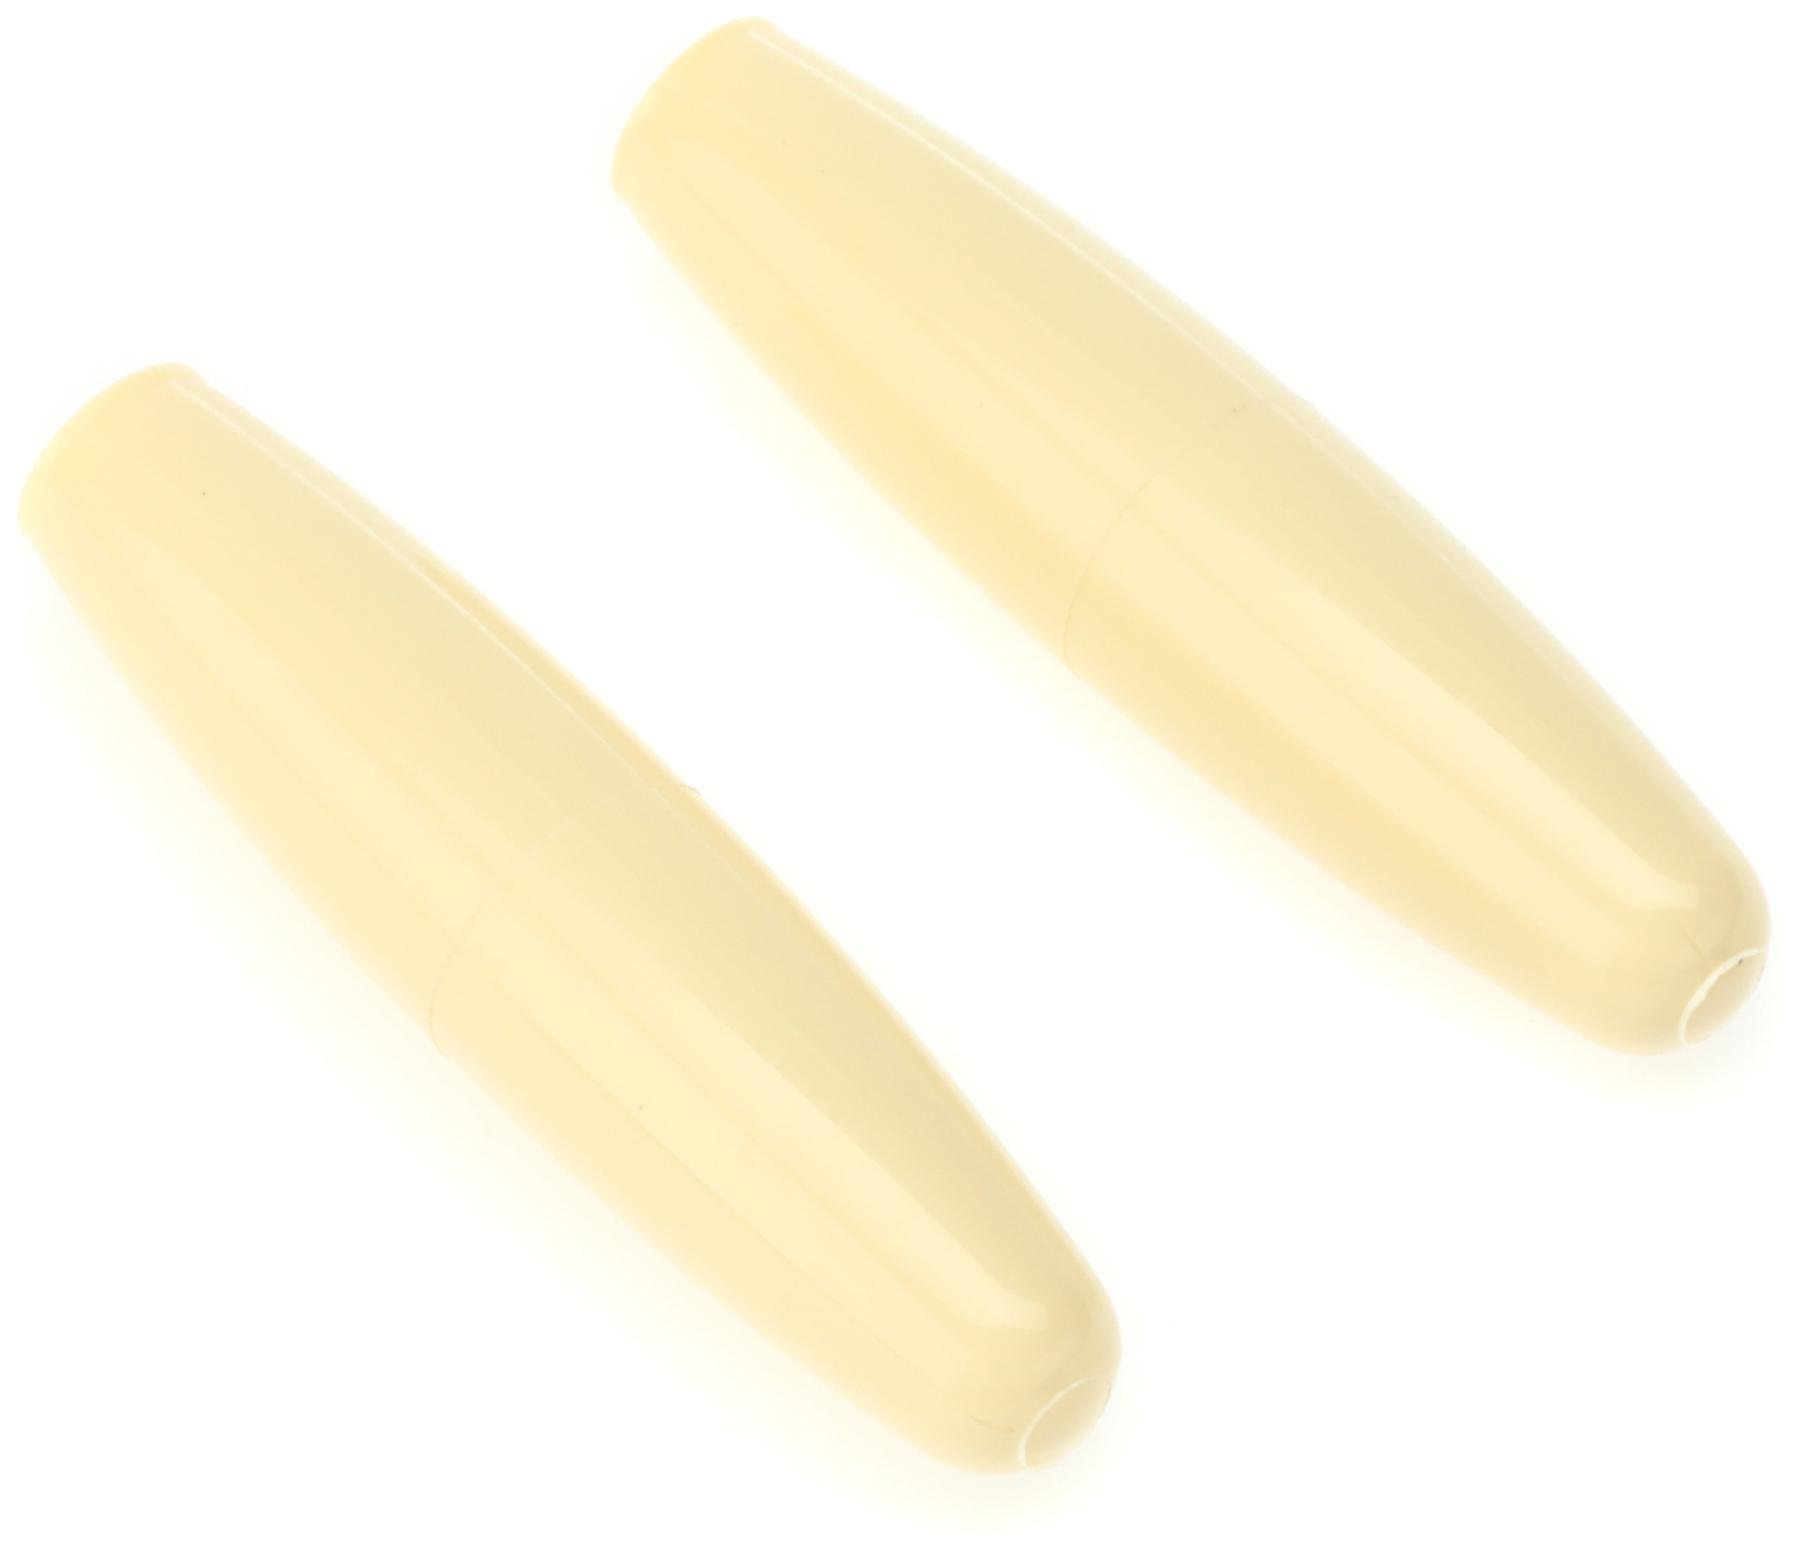 Fender Stratocaster Tremolo Arm Tips - Aged White | Sweetwater